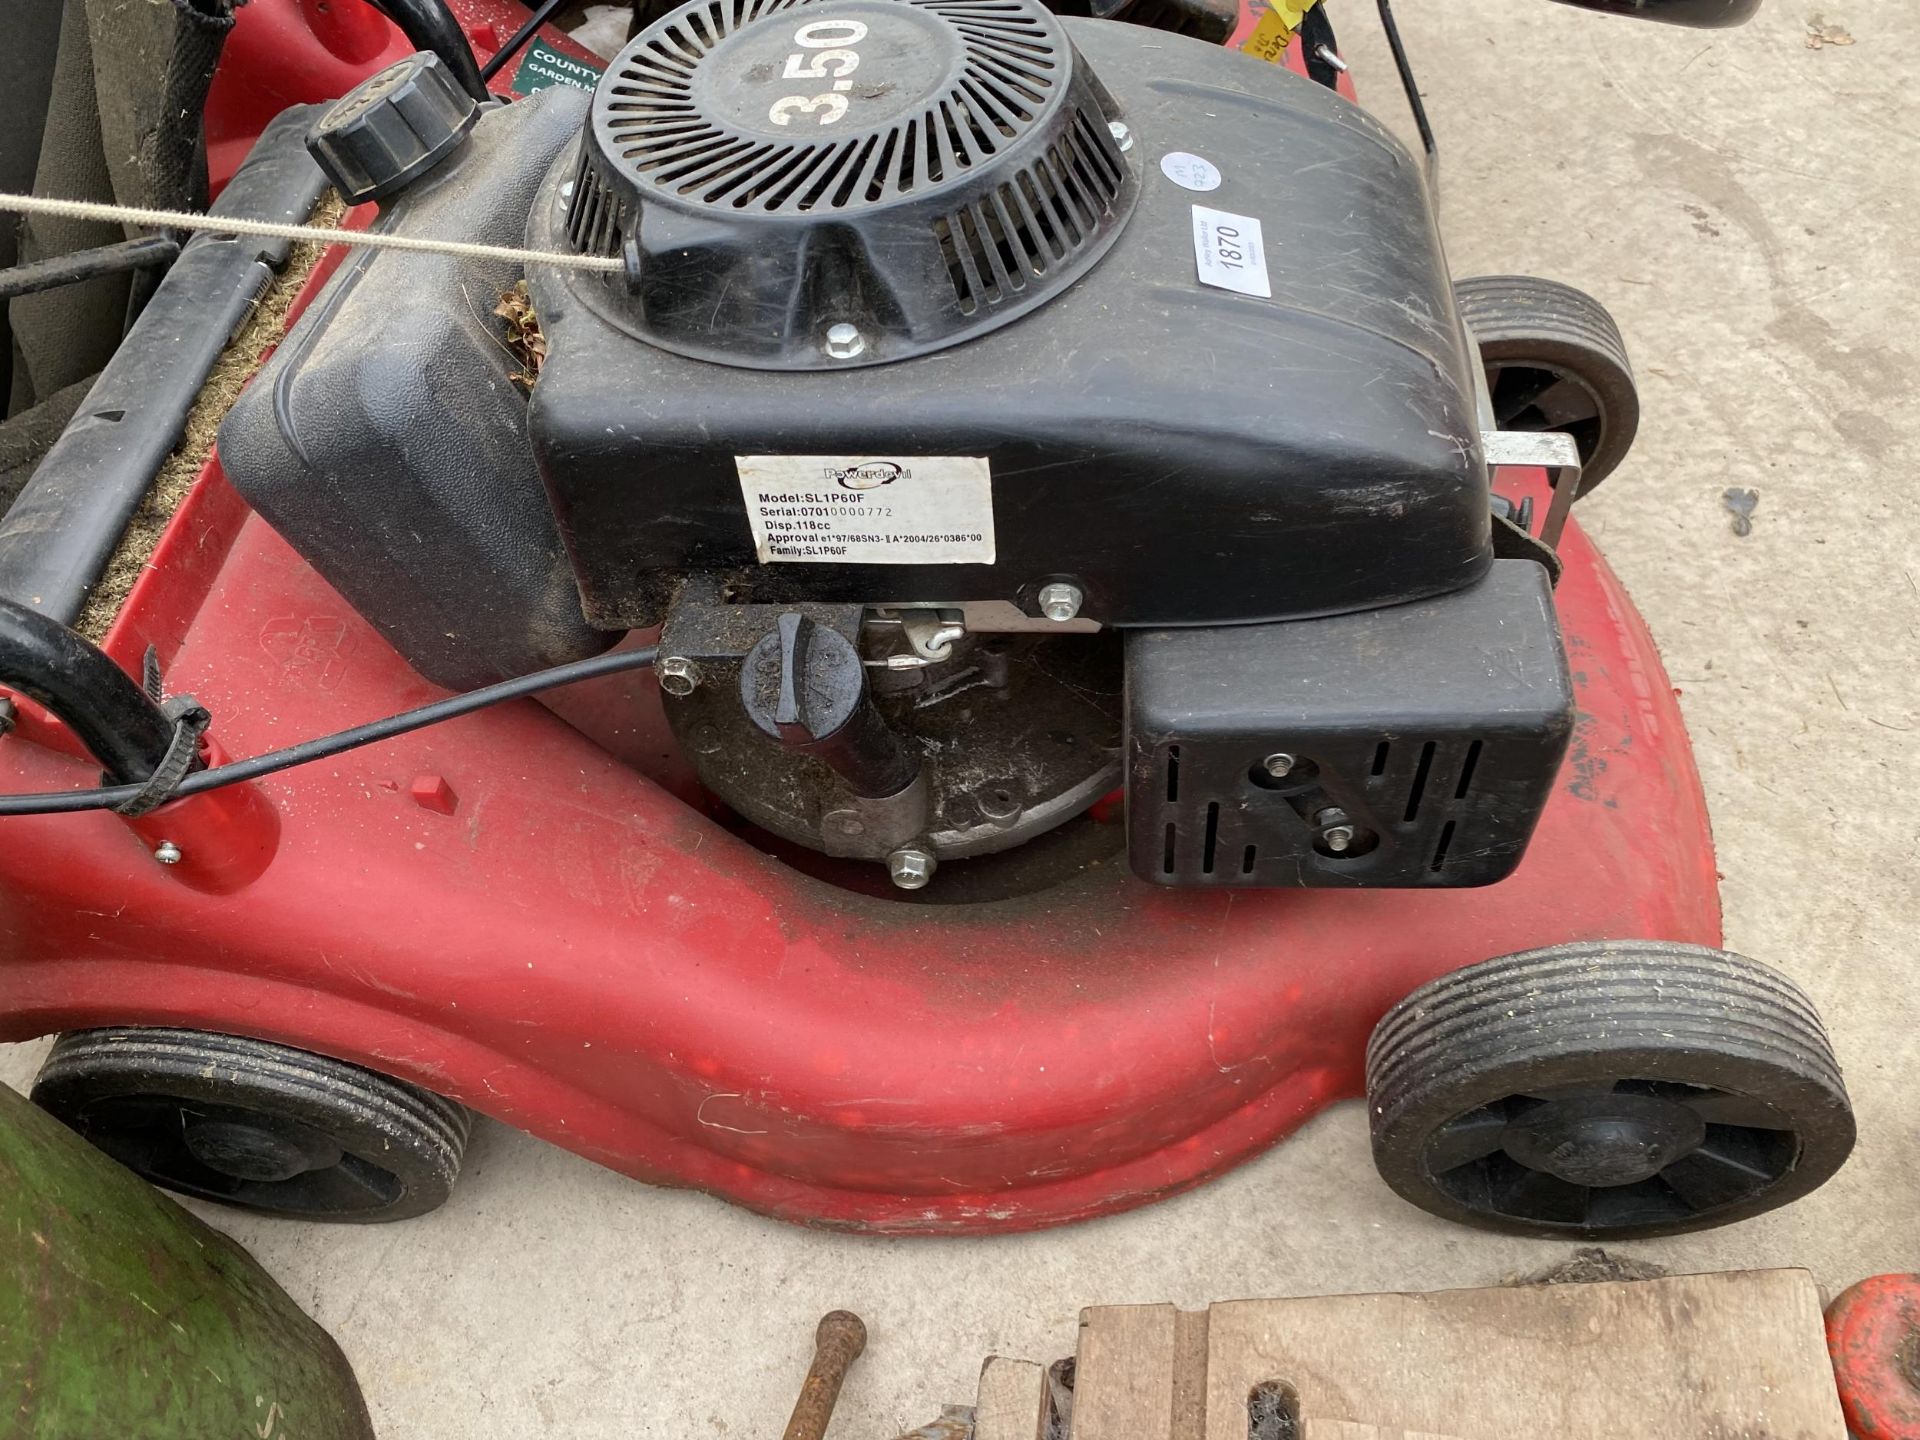 A POWER DEVIL PETROL ENGINE LAWN MOWER WITH GRASS BOX - Image 2 of 2